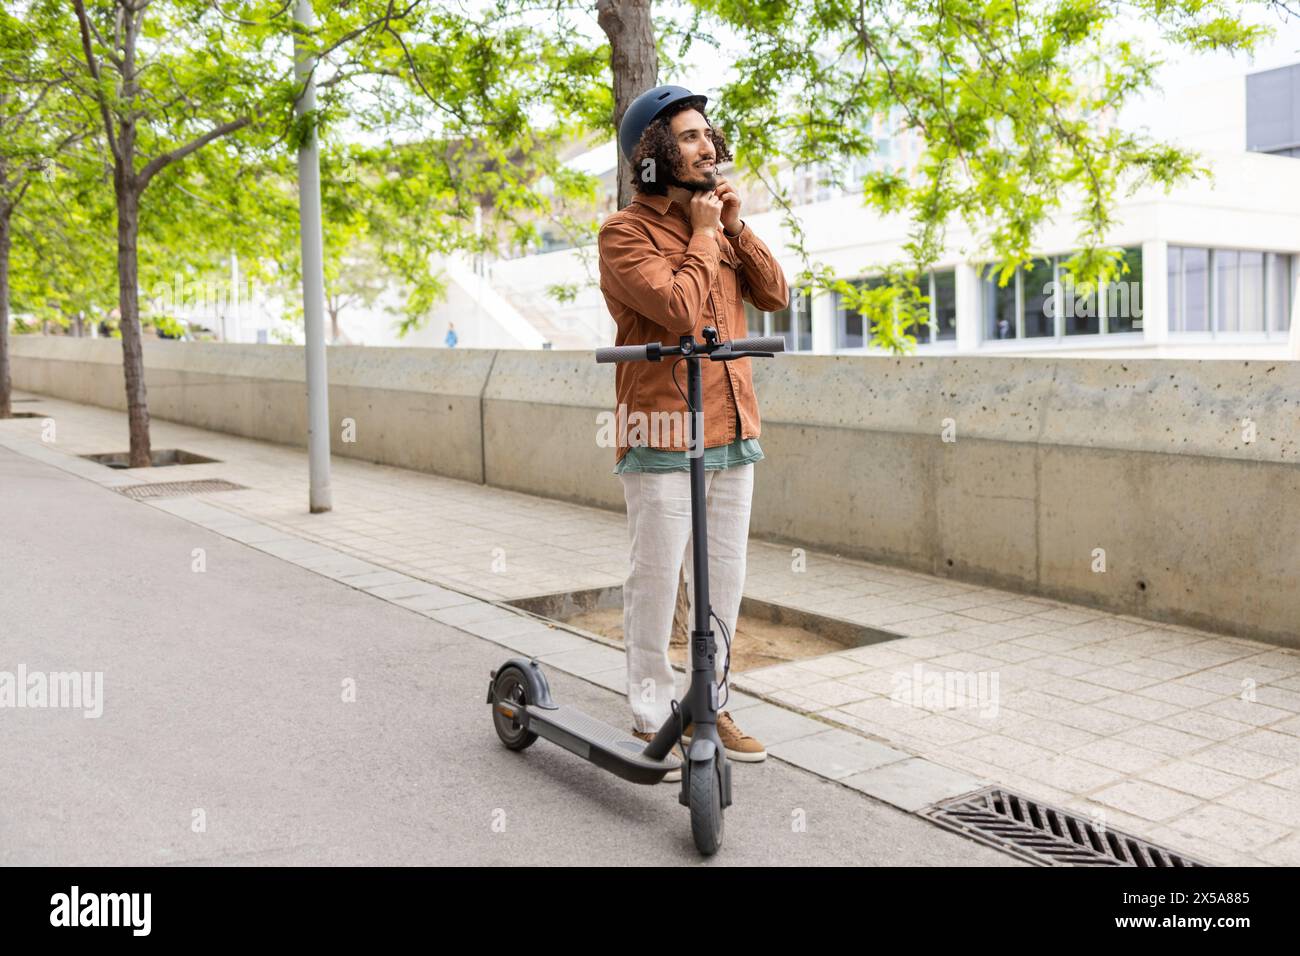 A young man in casual attire stands with an electric scooter, holding his chin thoughtfully in an urban, tree-lined area Stock Photo